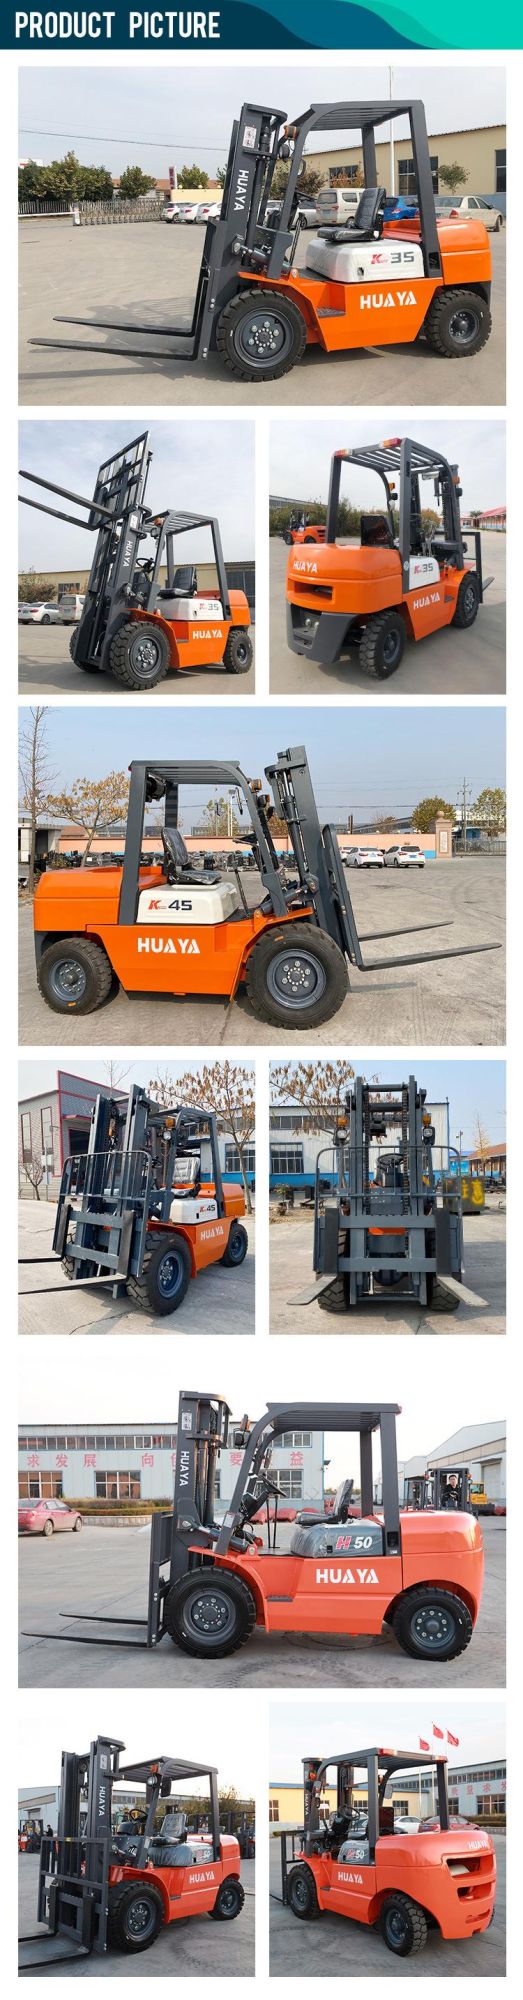 Diesel Engine Huaya Factory China Forklifts for Sale with Low Price